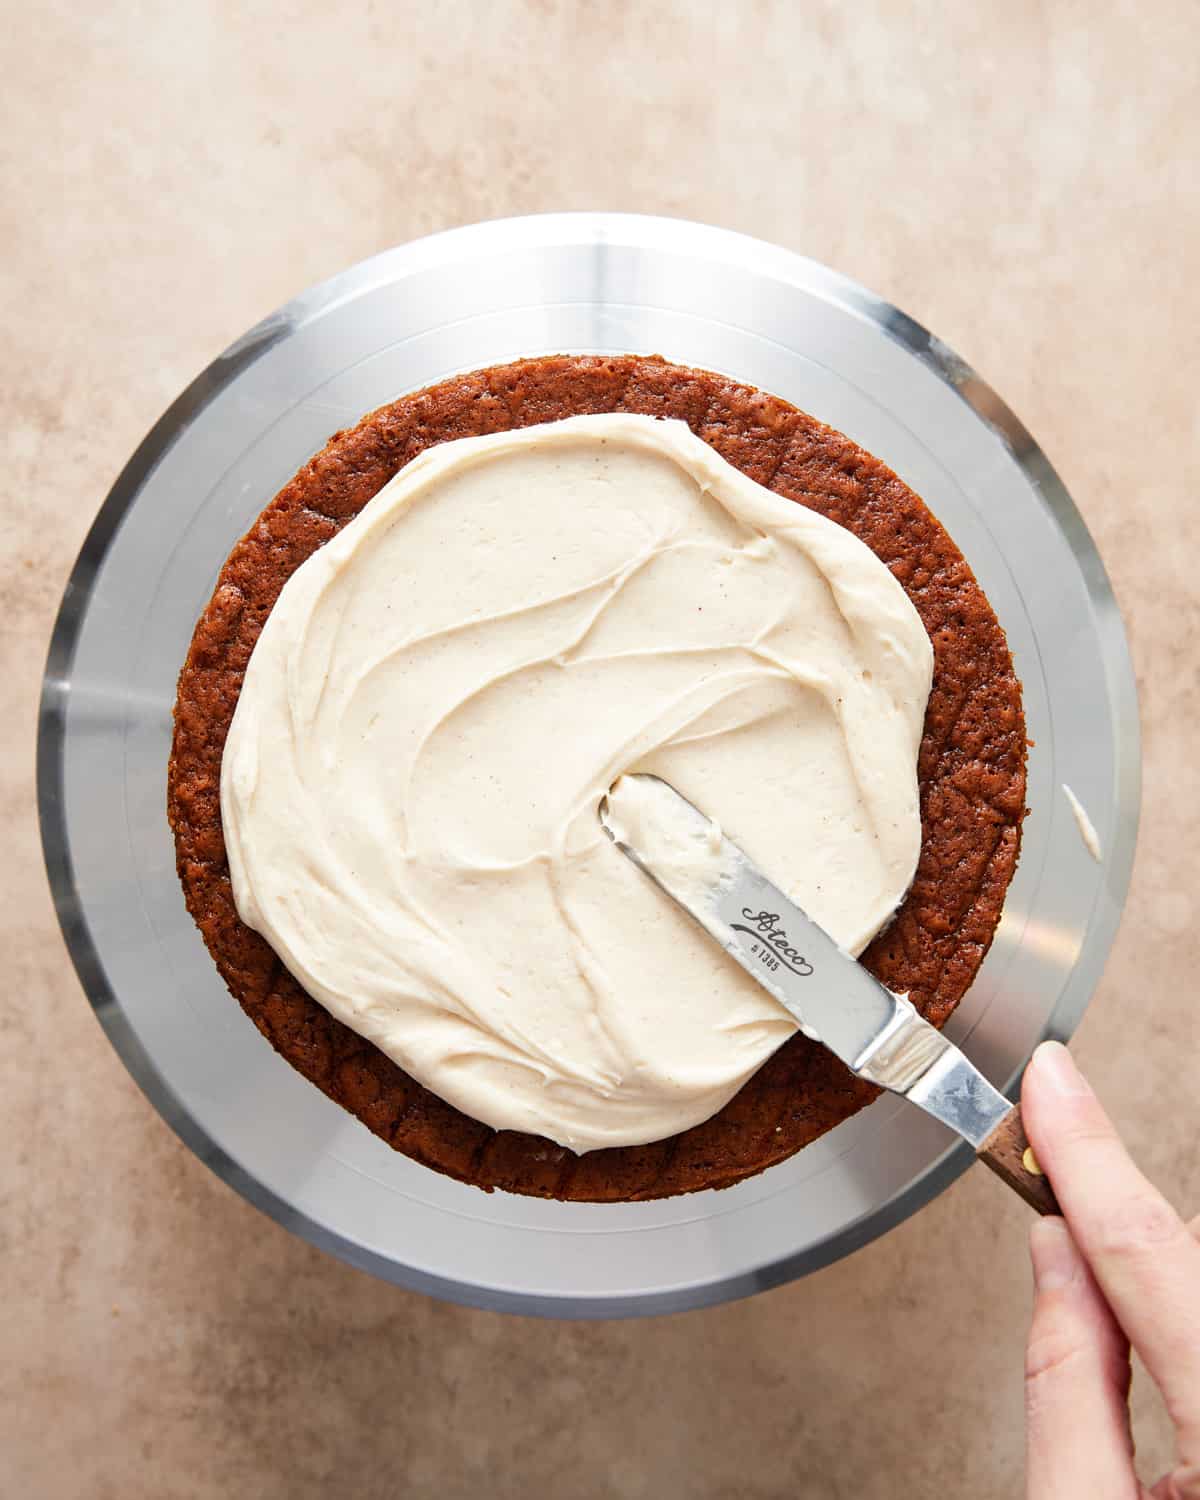 assembling gingerbread layer cake with cream cheese frosting.